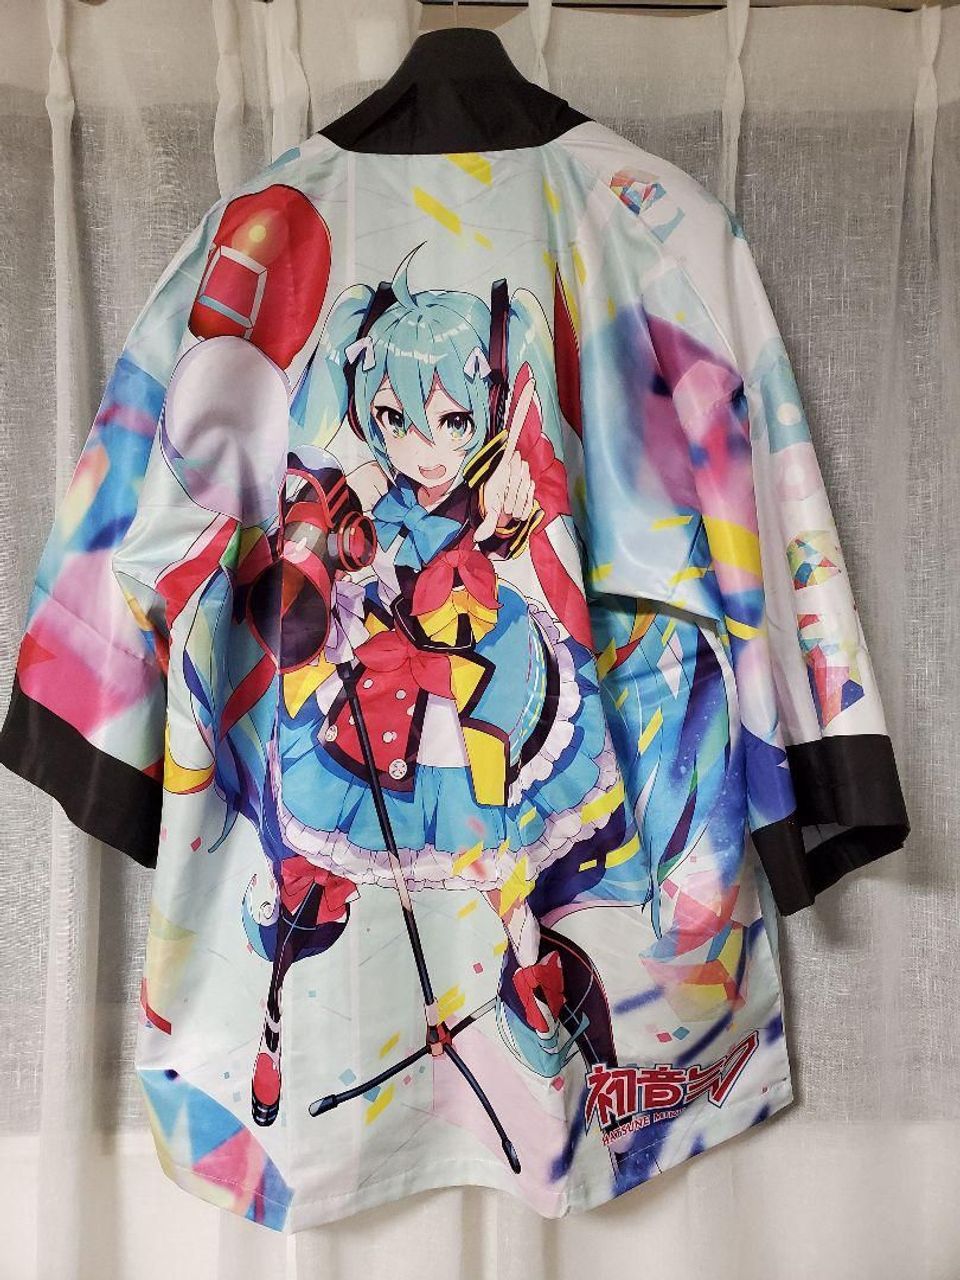 This is an offer made on the Request: miku hatsune happi jacket magical  mirai 2018